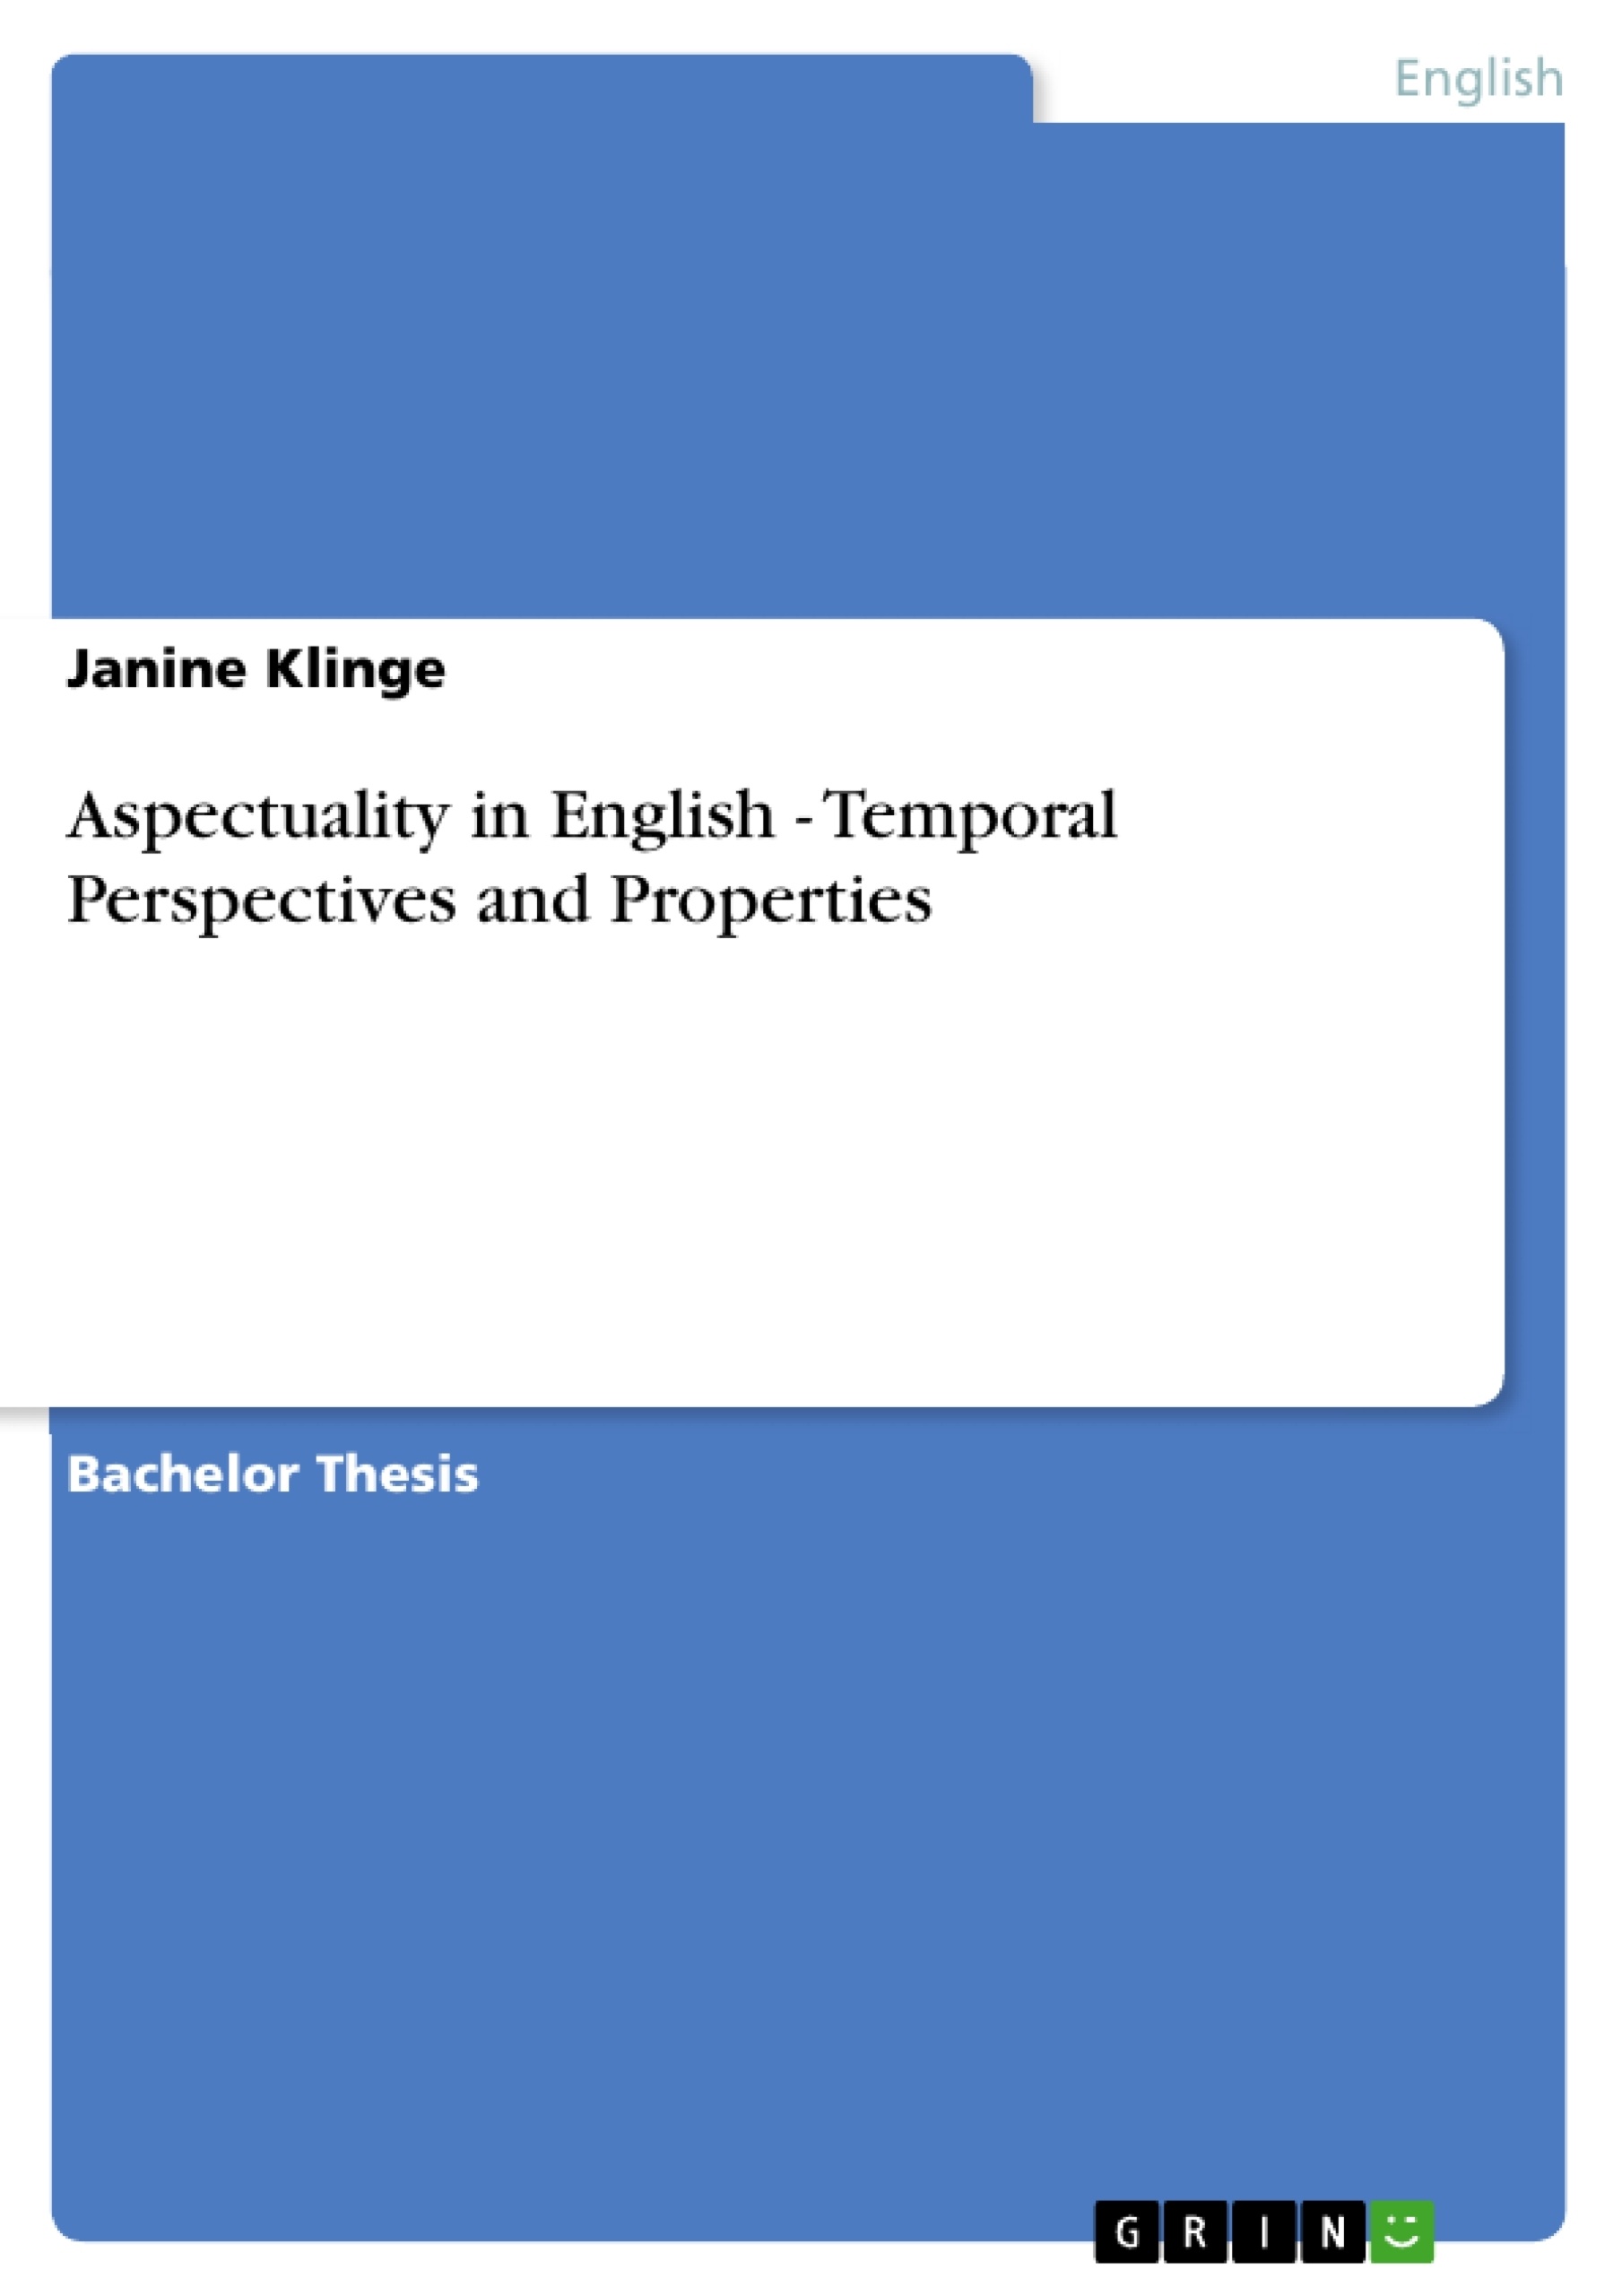 Title: Aspectuality in English - Temporal Perspectives and Properties